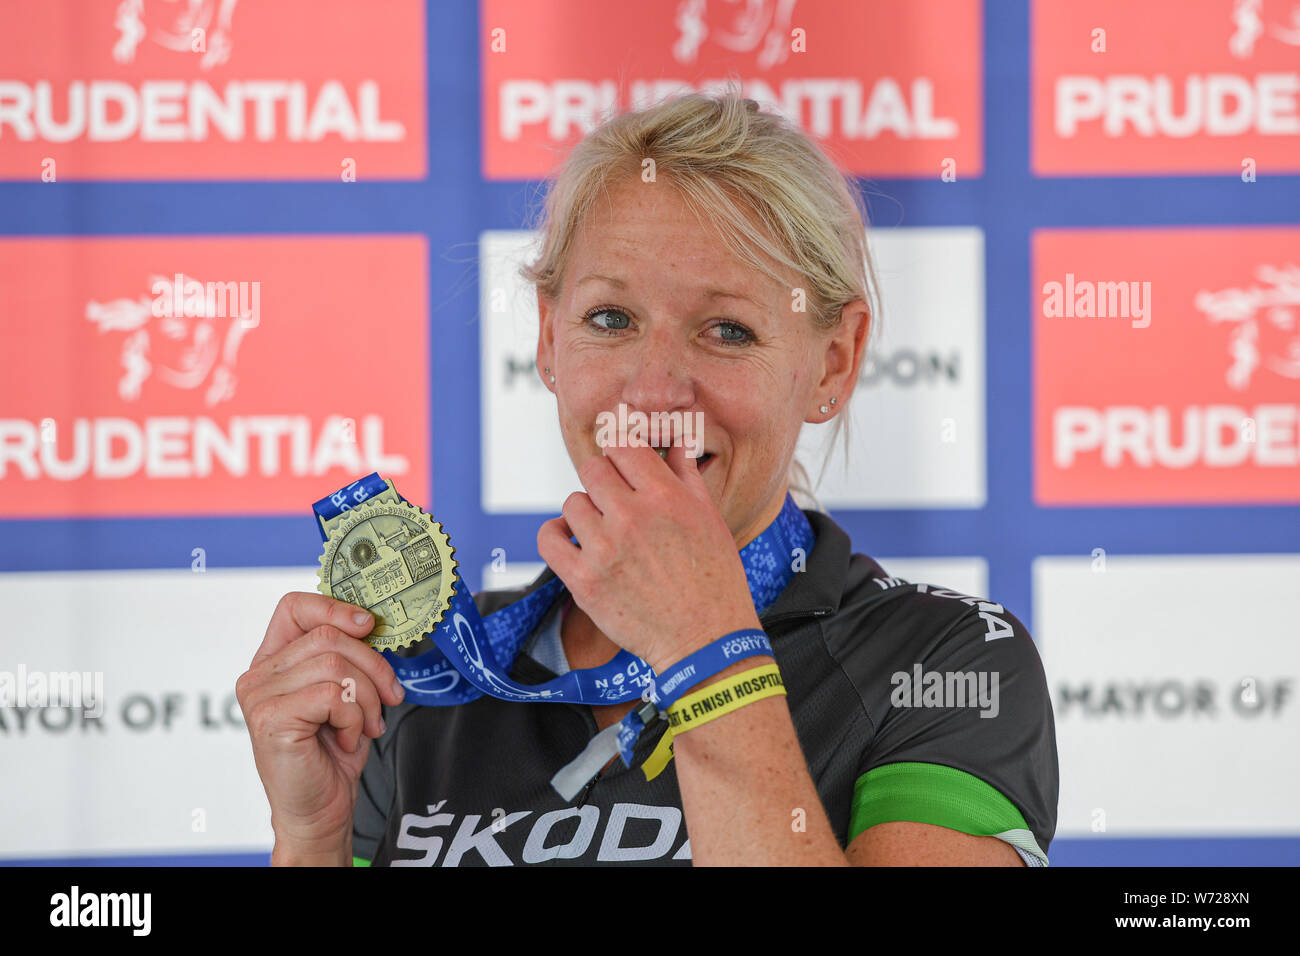 London, UK. 04th Aug, 2019. Gail Elizabeth Emms MBE - former English badminton player gives Prudential TV interviews after finished her 75 mile Challenge during Prudential RideLondon at The Mall on Sunday, August 04, 2019 in LONDON United Kingdom. Credit: Taka G Wu/Alamy Live News Stock Photo